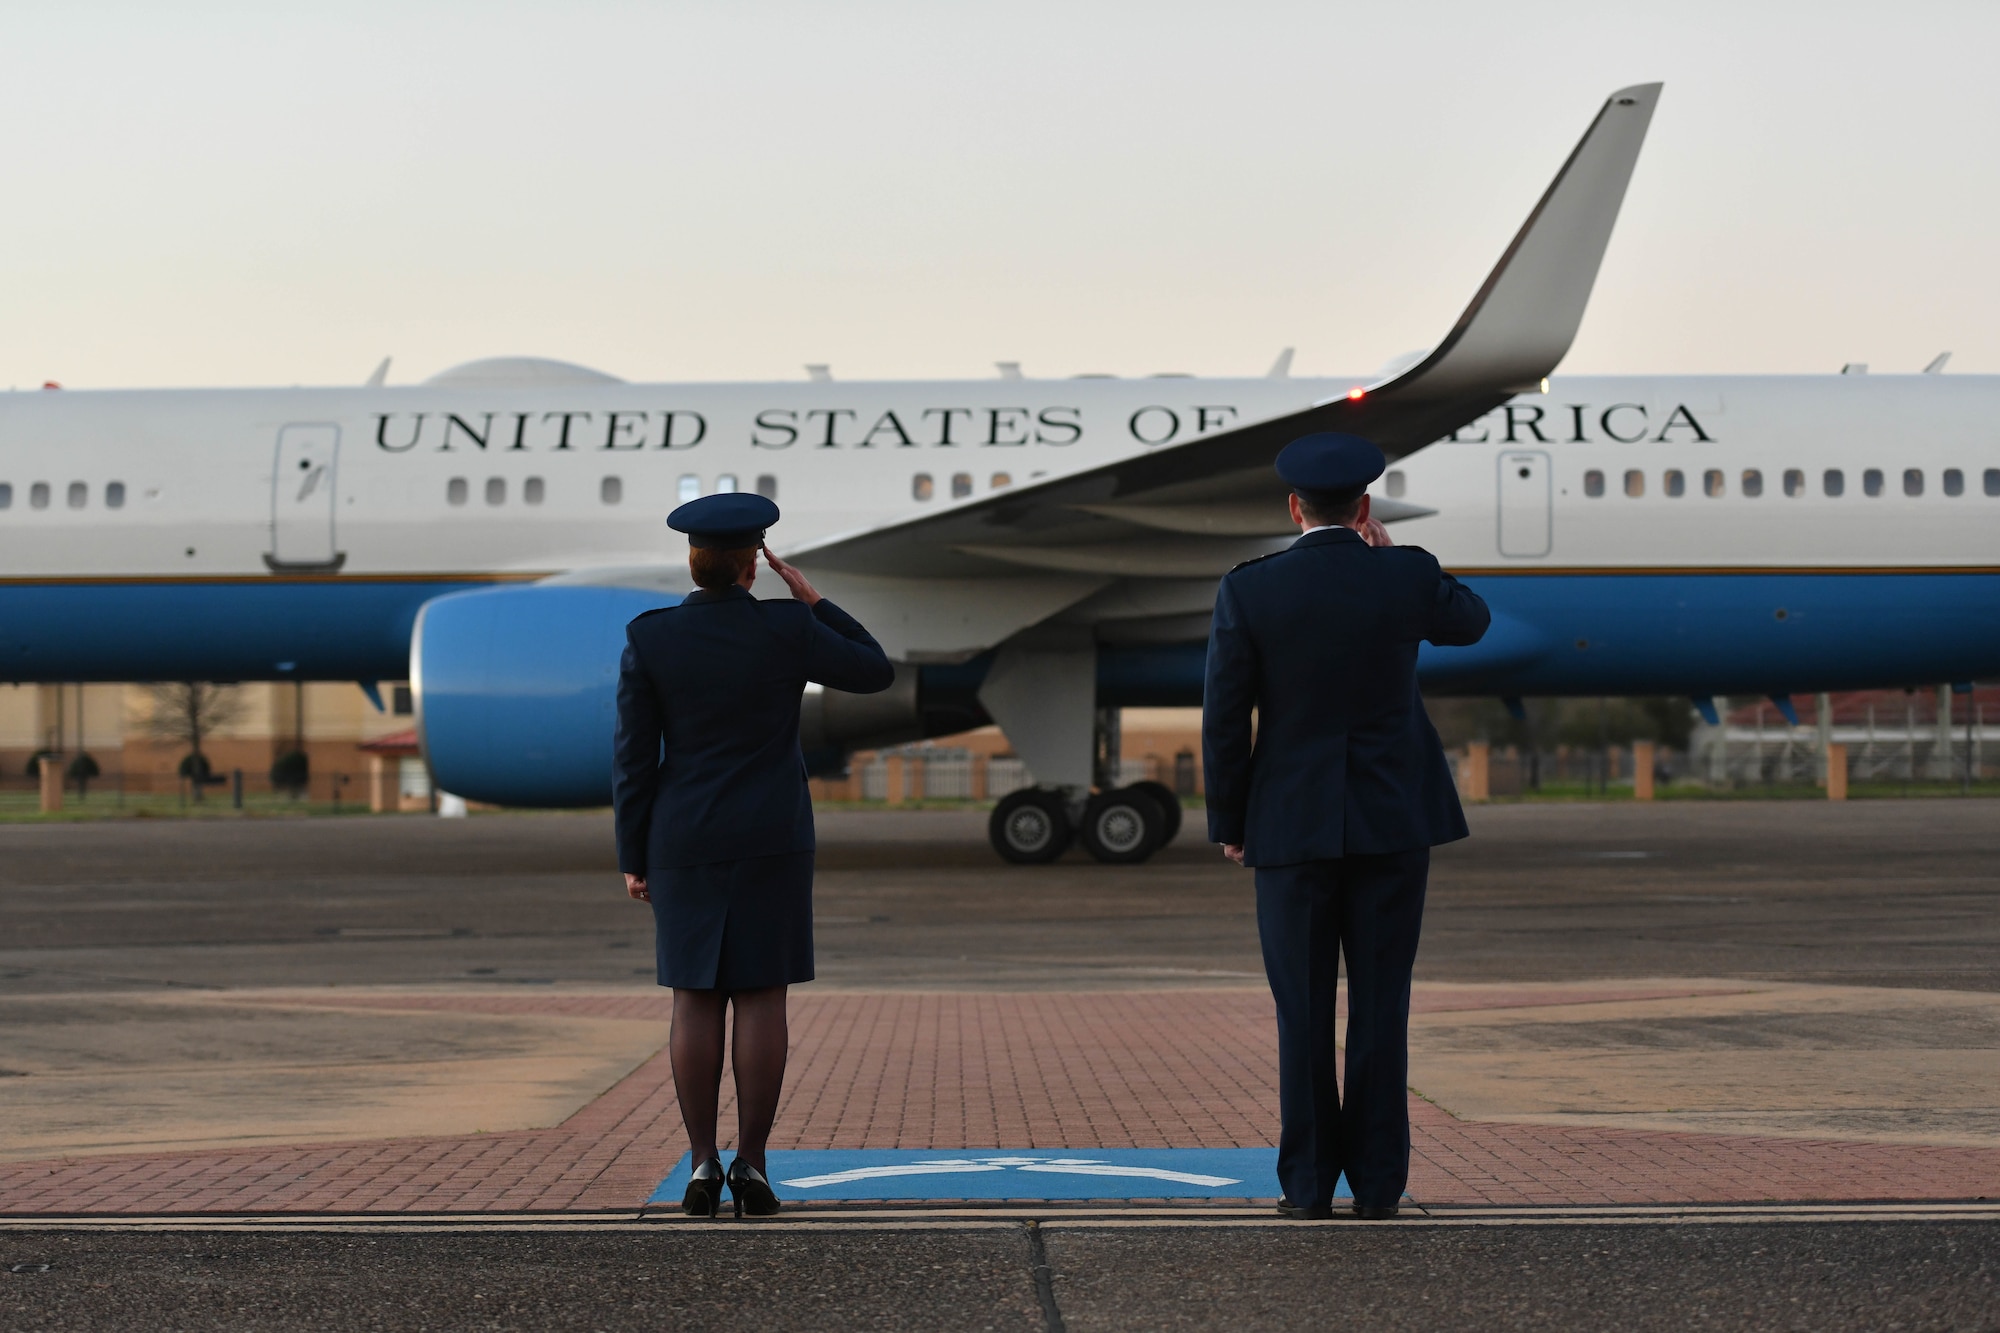 Col. Eries Mentzer, 42nd Air Base Wing commander, and Lt. Gen. James Hecker, Air University commander and president, salute Air Force Two as it departs from Maxwell Air Force Base, Alabama, March 6, 2022. Vice President Kamala Harris visited Alabama to commemorate the 57th anniversary of Bloody Sunday, a civil rights march that turned to tragedy. (U.S. Air Force photo by Senior Airman Jackson Manske)